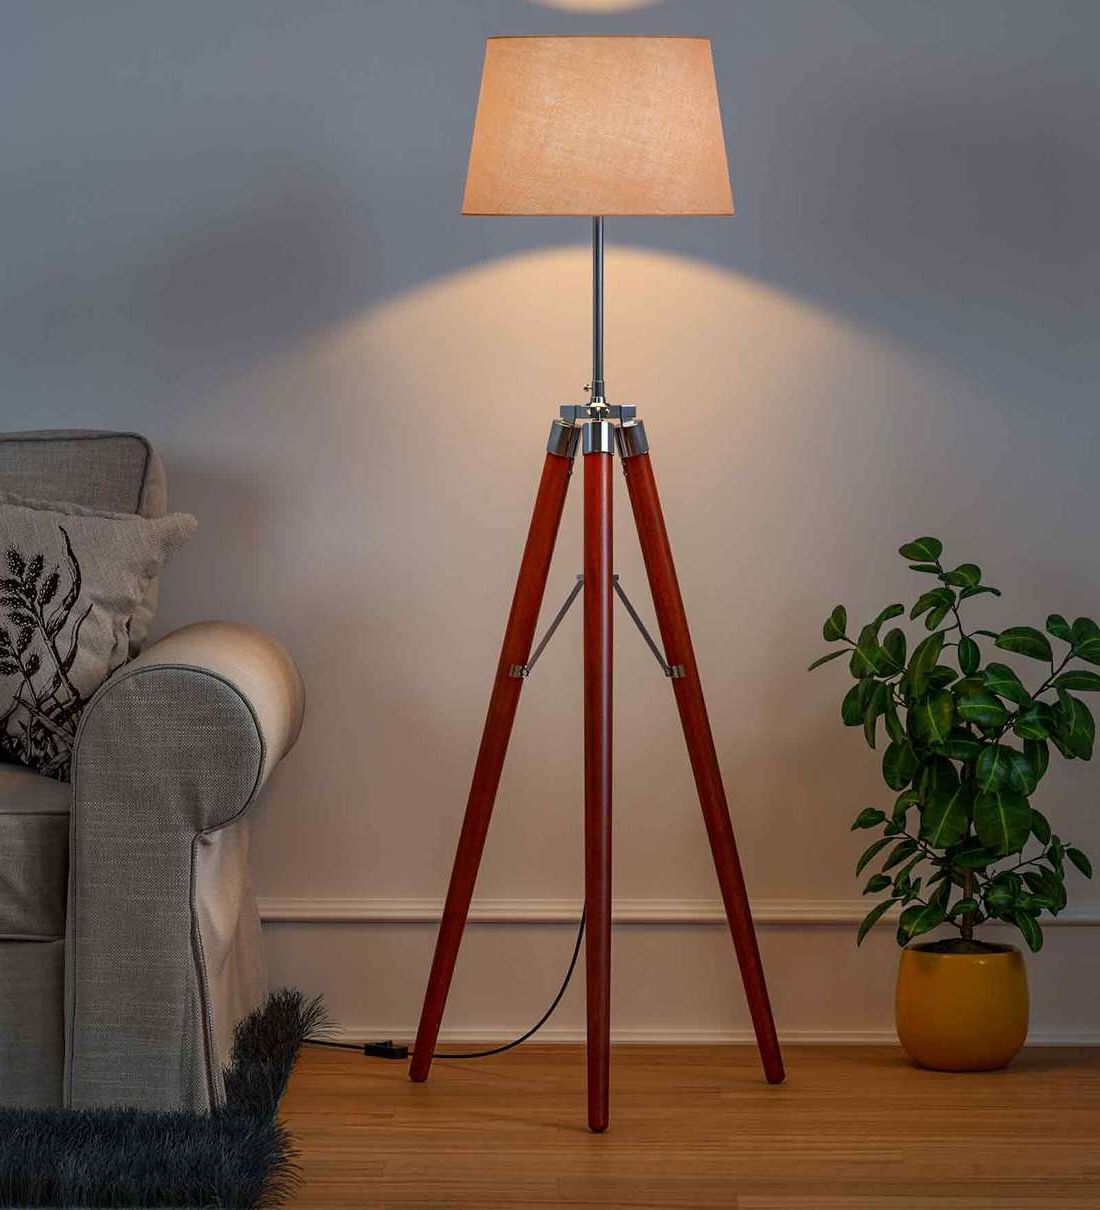 Buy Wooden Natural Brown Stick Tripod Floor Lamp Standing With Lamp Shade Kp Lamps Store Online – Tripod Floor Lamps – Floor Lamps – Lamps And  Lighting – Pepperfry Product For 2020 Tripod Standing Lamps (View 4 of 10)